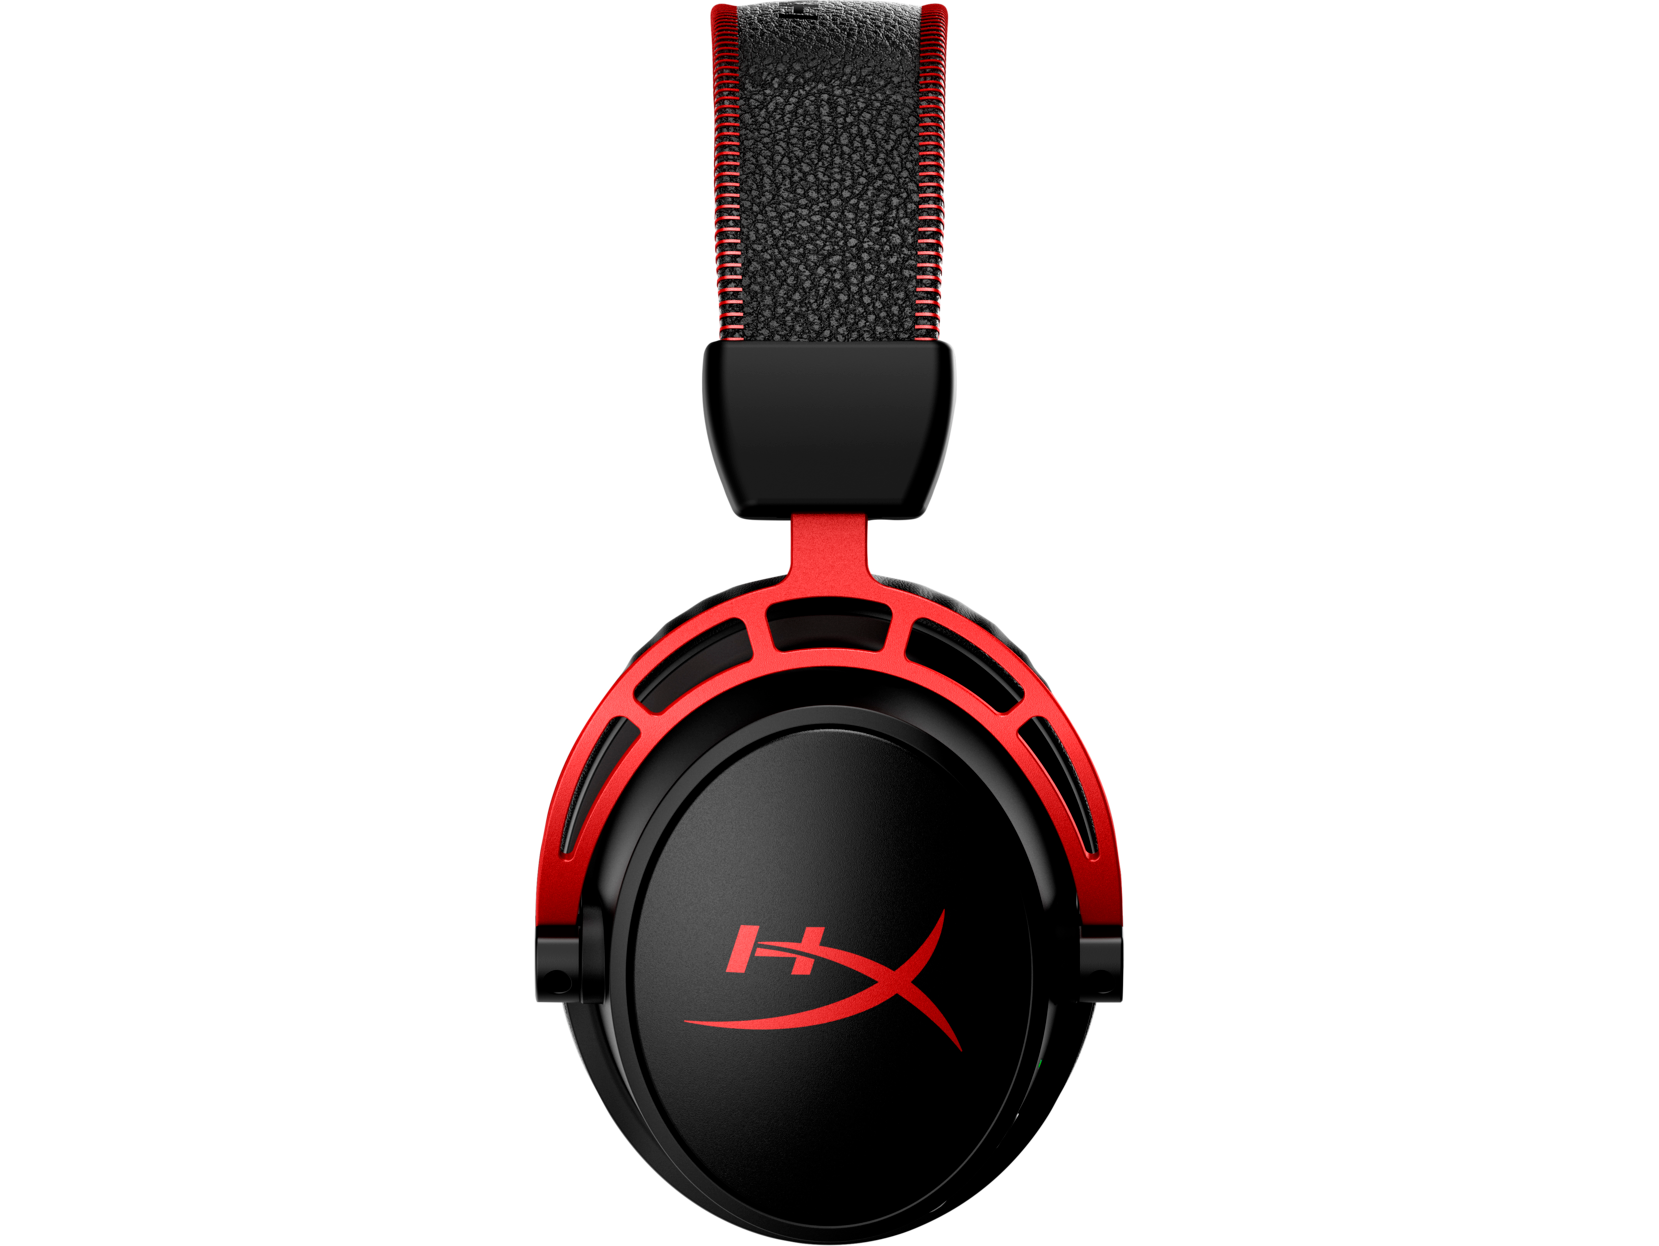 HyperX Cloud Alpha Wireless Over-Ear Gaming Headset, Red - image 4 of 7